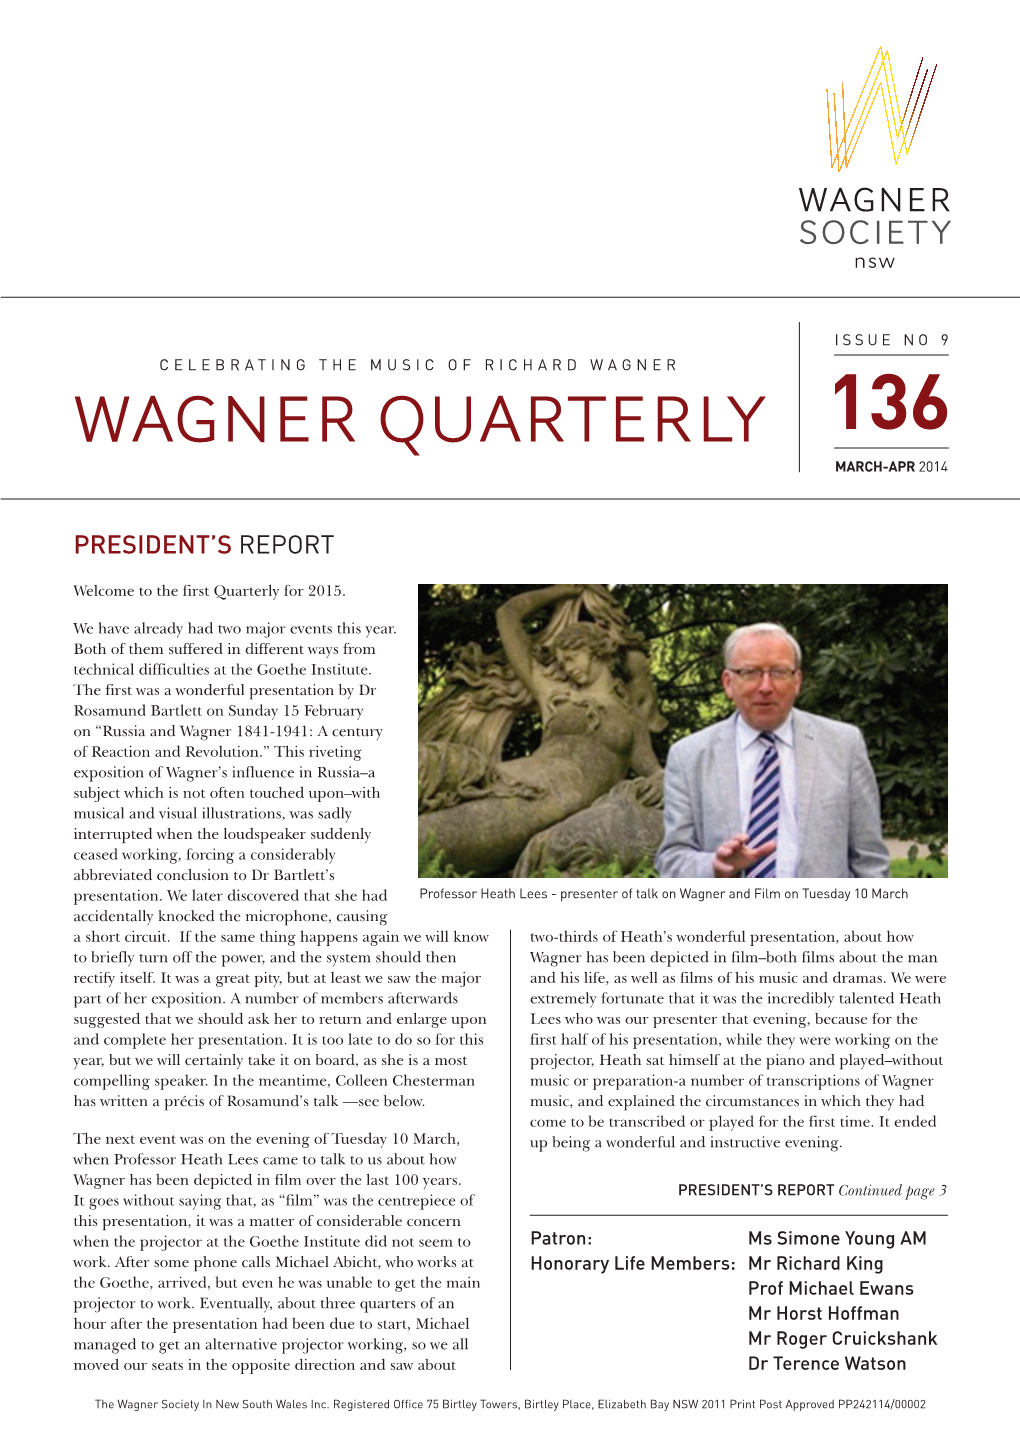 Wagner Quarterly 136 March-Apr 2014